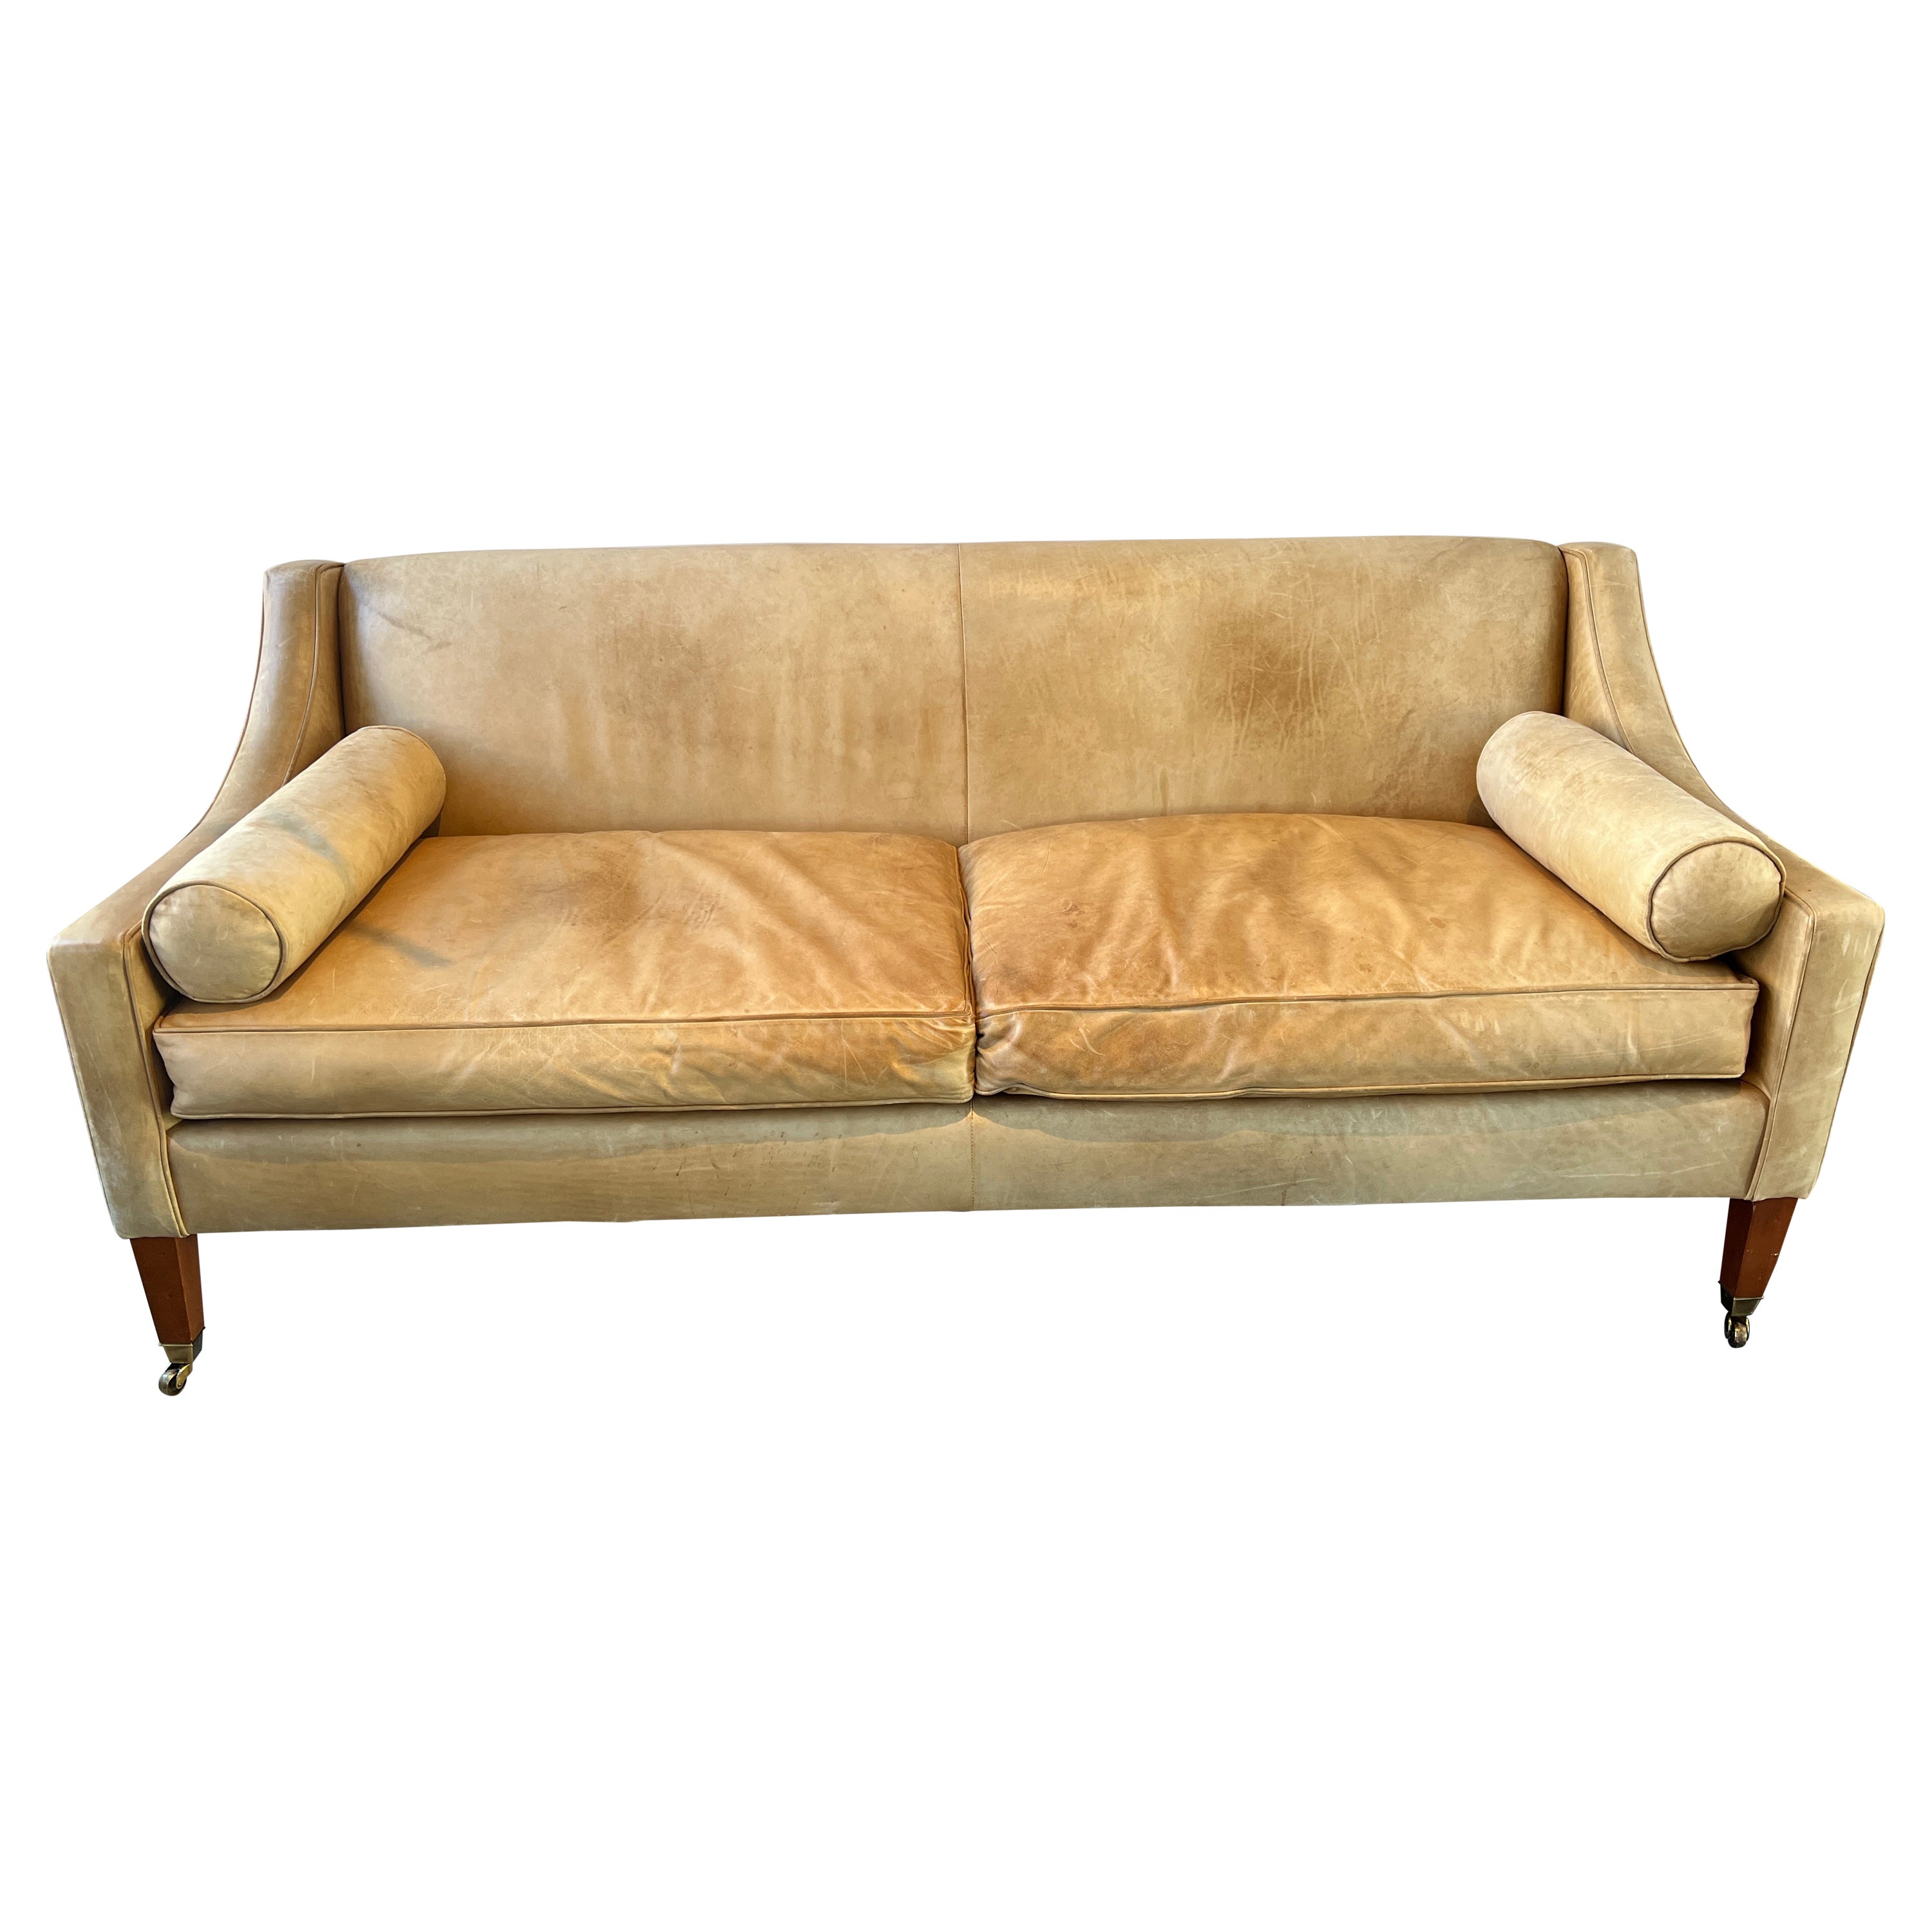 Tan Leather Ralph Lauren Couch For Sale at 1stDibs